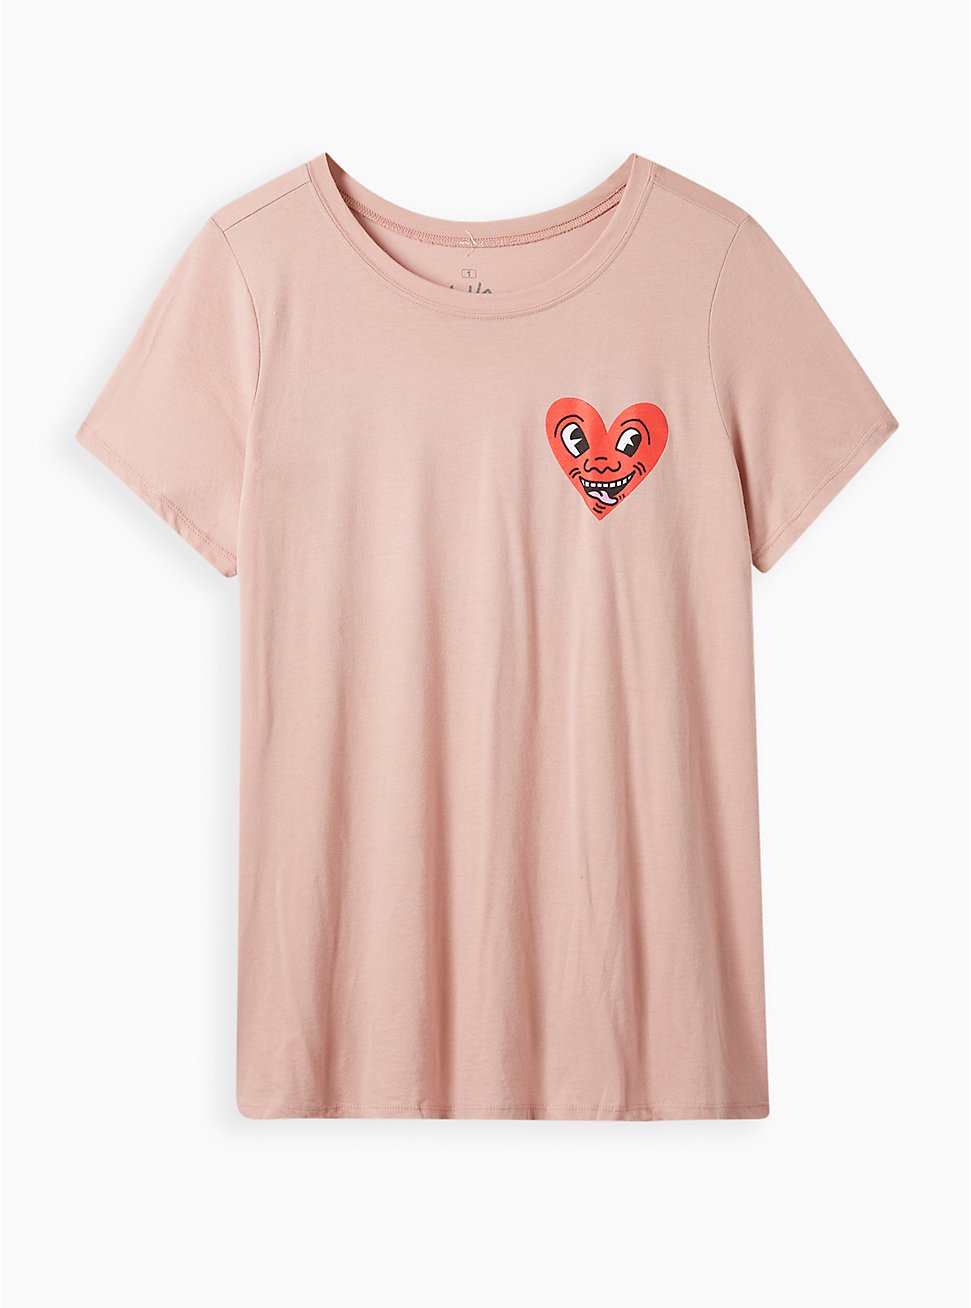 Keith Haring Slim Fit Crew Tee - Cotton-Blend Heart Pink, DUSTY QUARTZ, hi-res